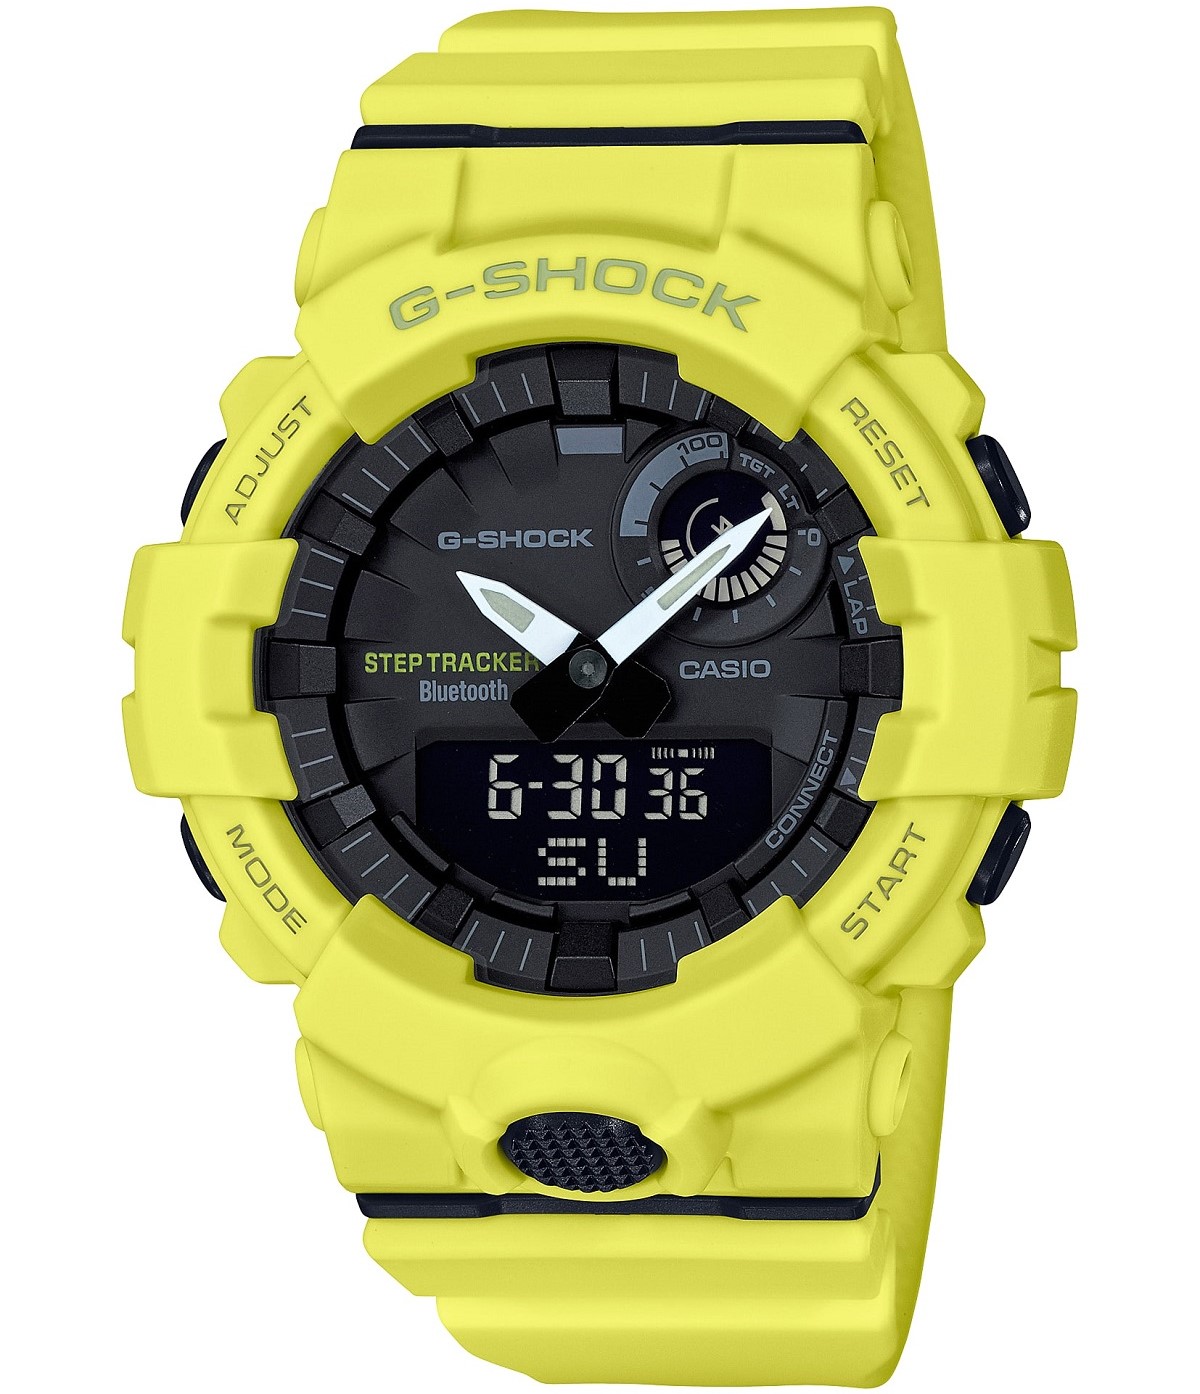 Casio G-Shock GBA-800 Watches With Fitness Tracking | aBlogtoWatch